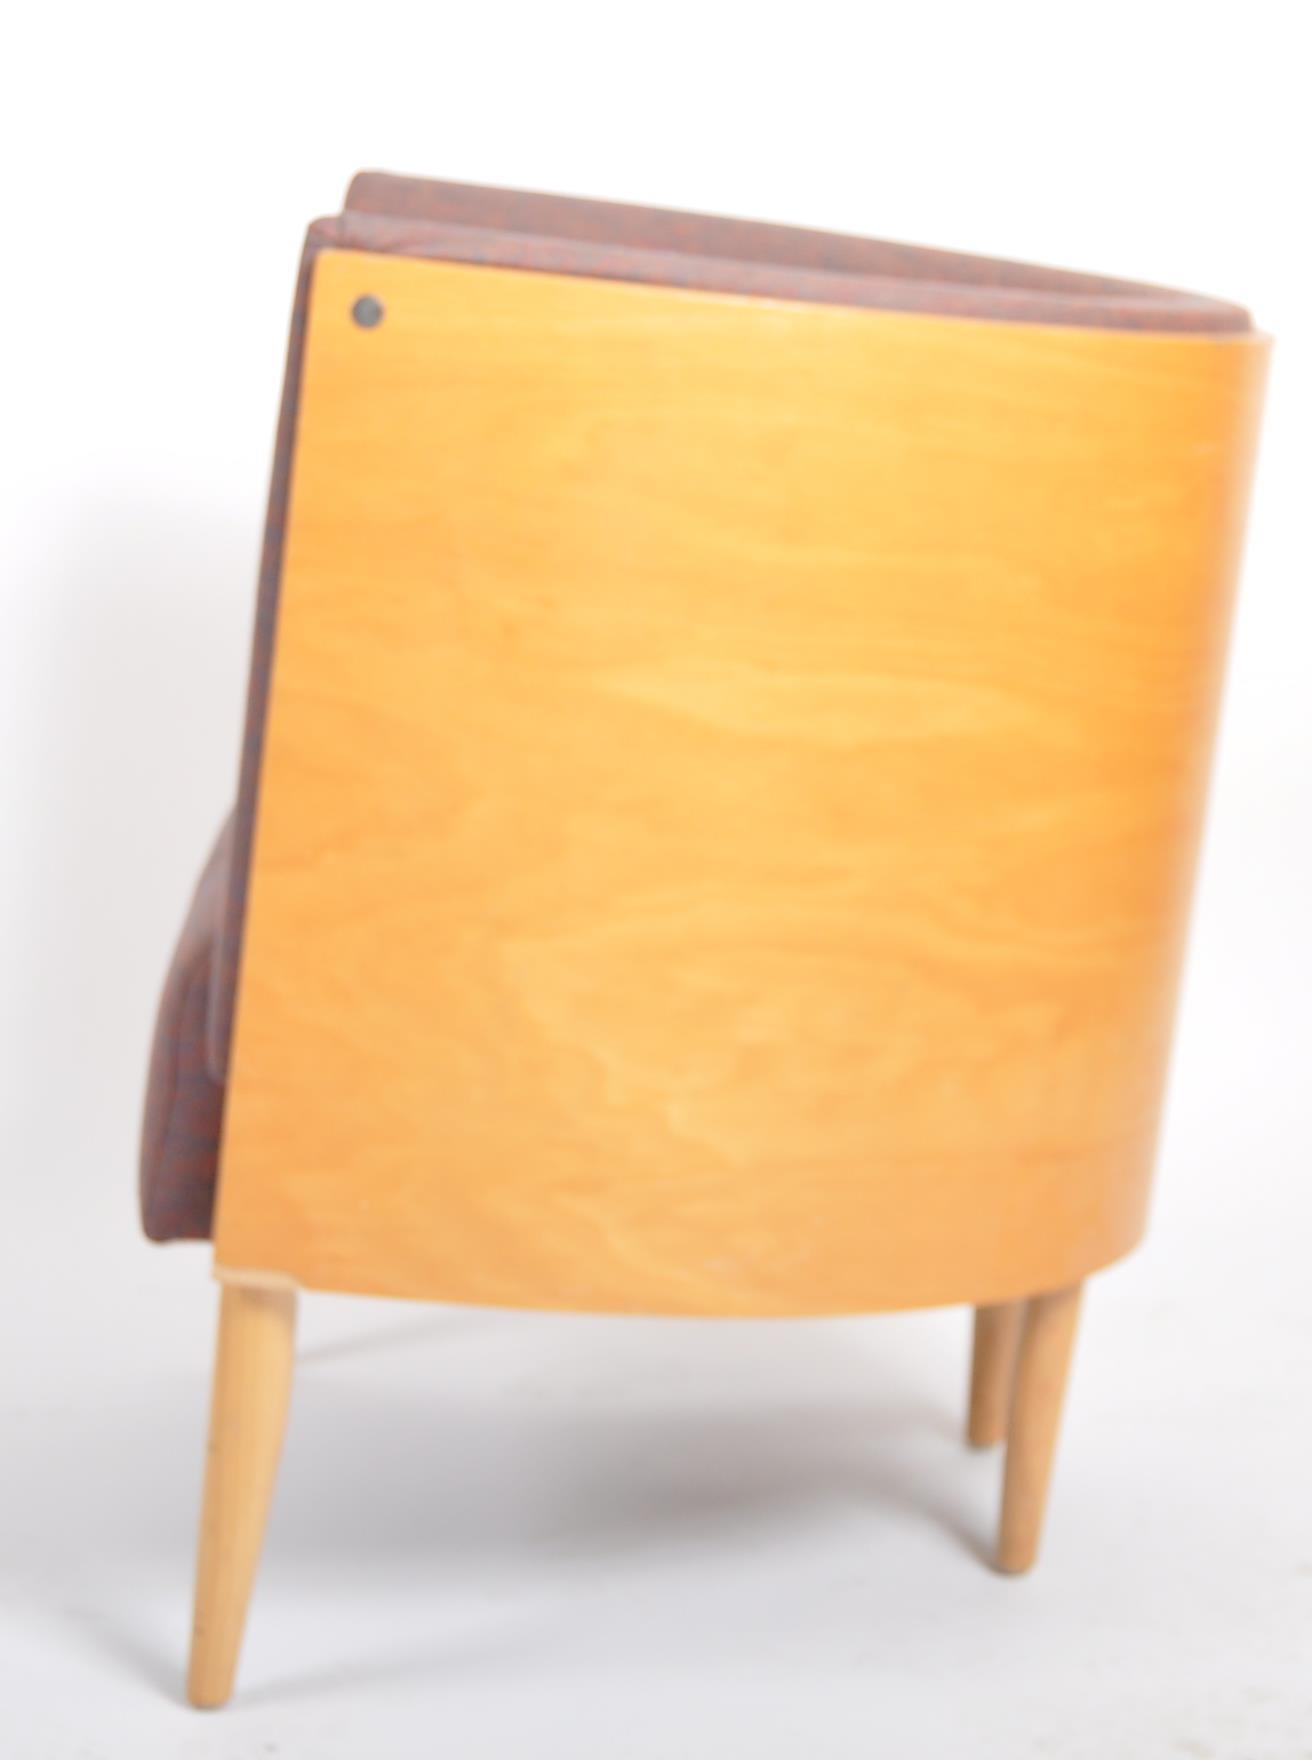 ALLERMUIR - PAIR OF EARLY 2000 BENTWOOD LOUNGE CHAIRS - Image 7 of 8